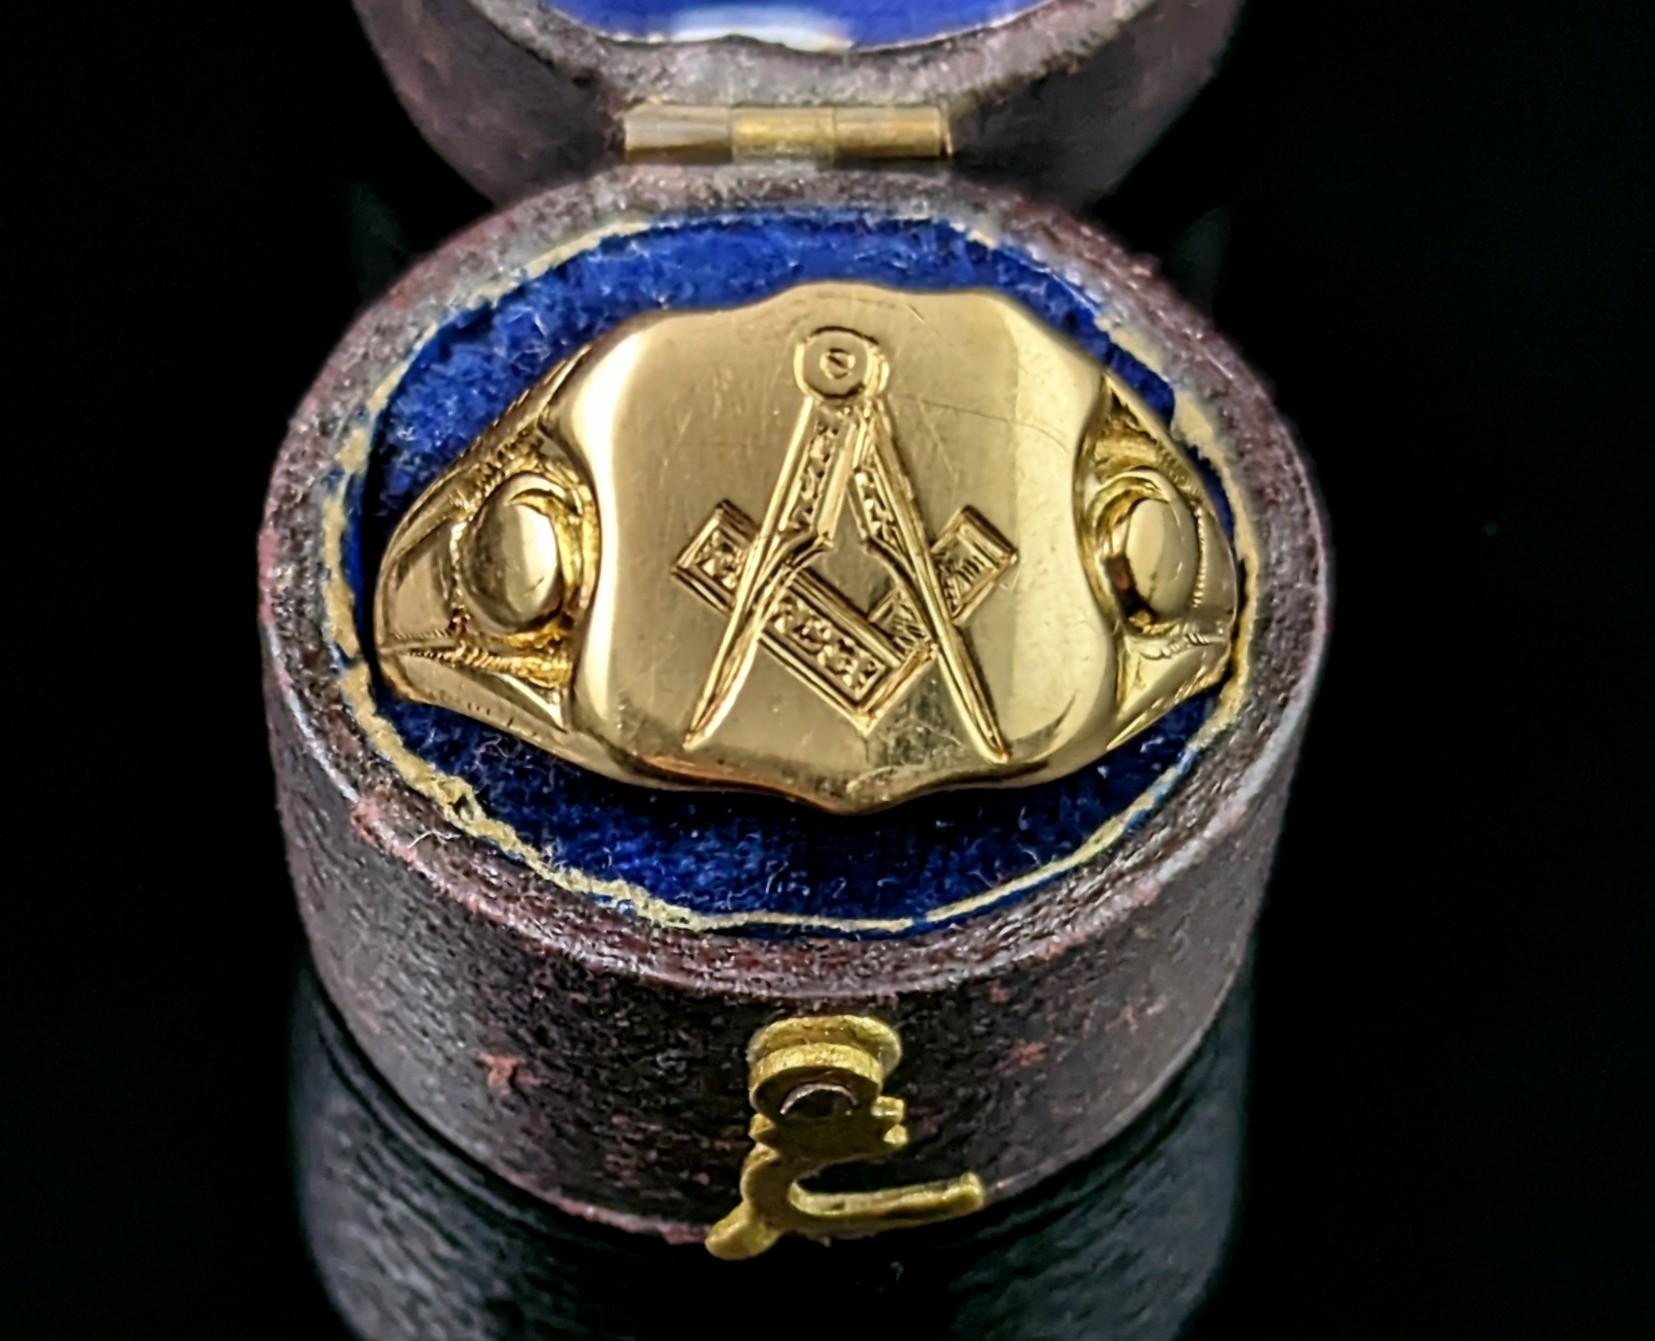 This antique Art Deco era signet ring is quite the charmer.

A gorgeous rich buttery 18ct gold, lovely chunky raised shoulders and a very well engraved face all combine to make this a very handsome signet ring.

It is engraved with the Masonic